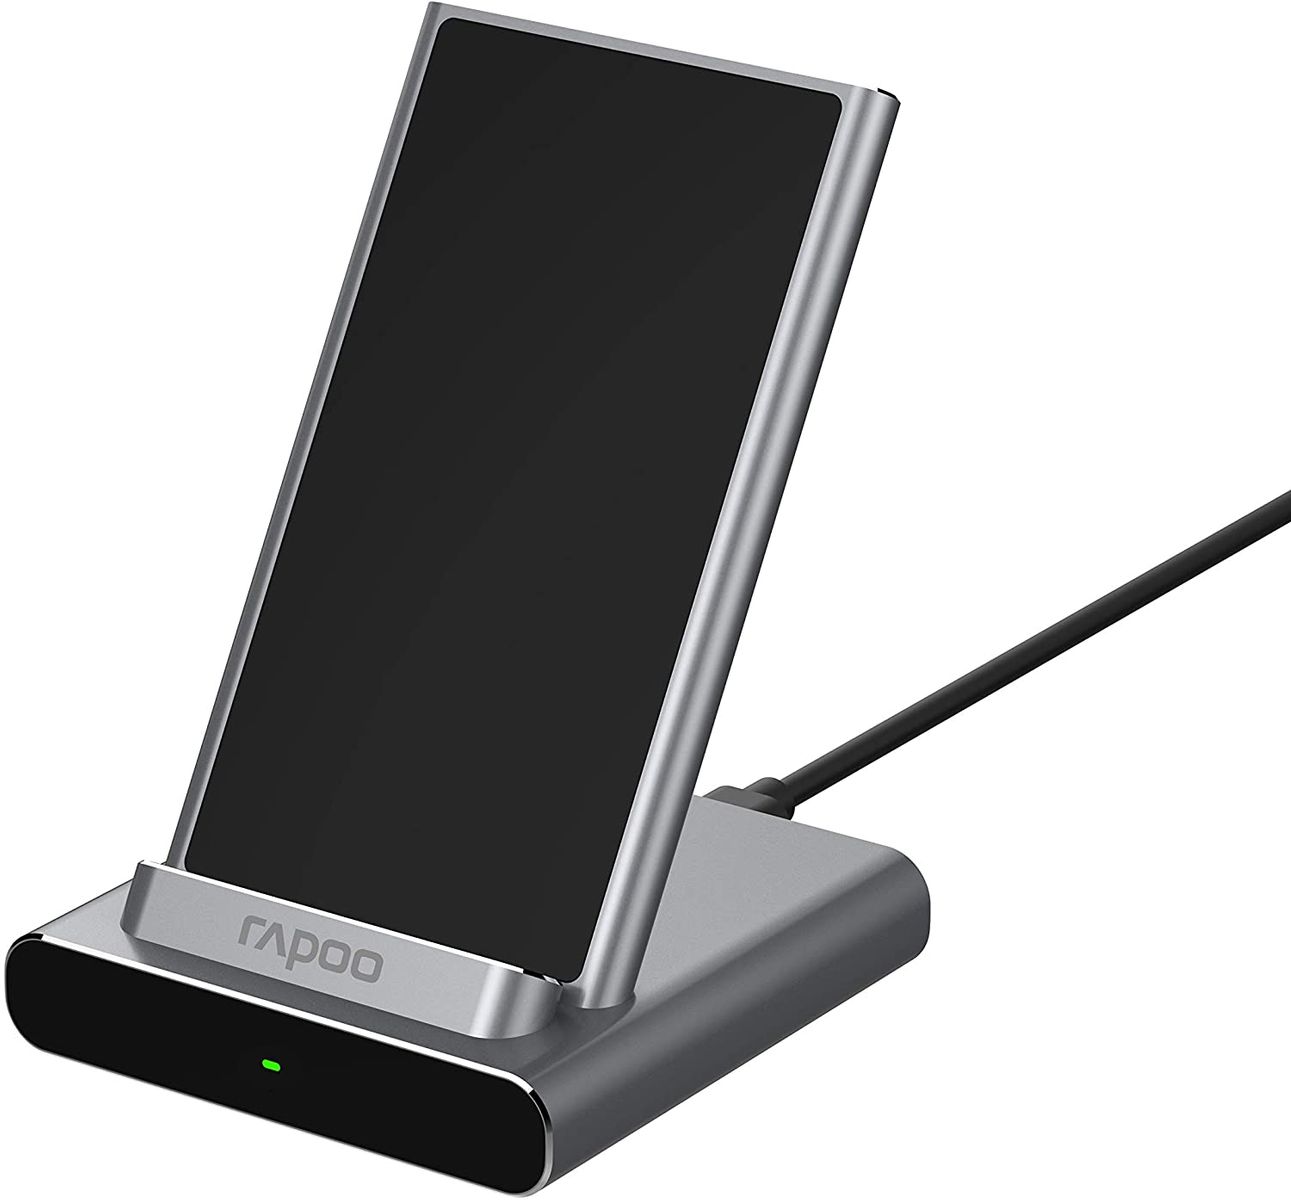 Rapoo XC350 Wireless Induction Charger for Smartphone, Charger for iOS and Android